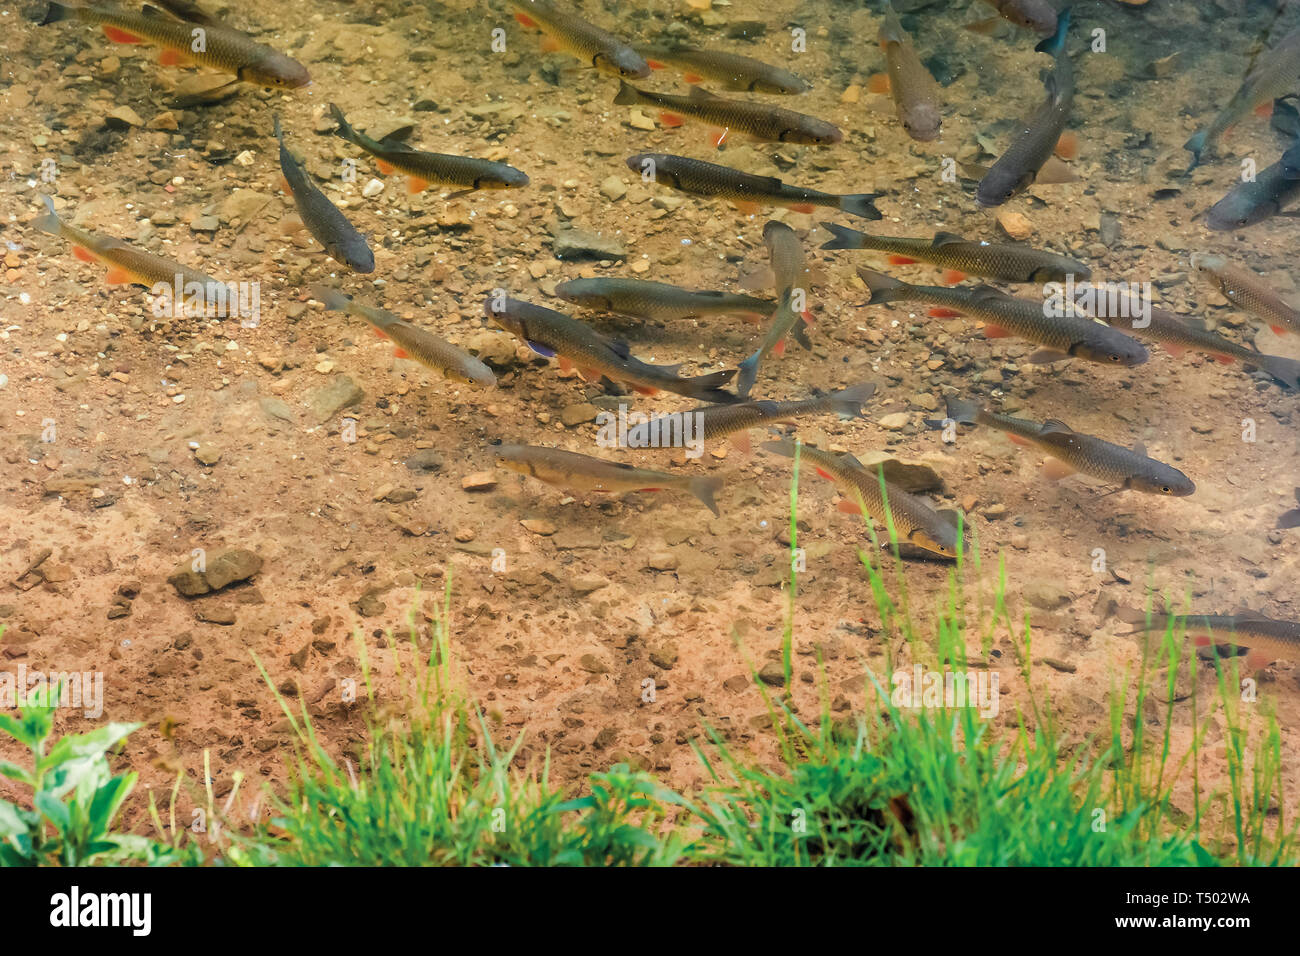 https://c8.alamy.com/comp/T502WA/trout-on-the-bottom-of-the-lake-lots-of-fish-swimming-freely-in-clear-water-green-grass-on-the-shore-T502WA.jpg